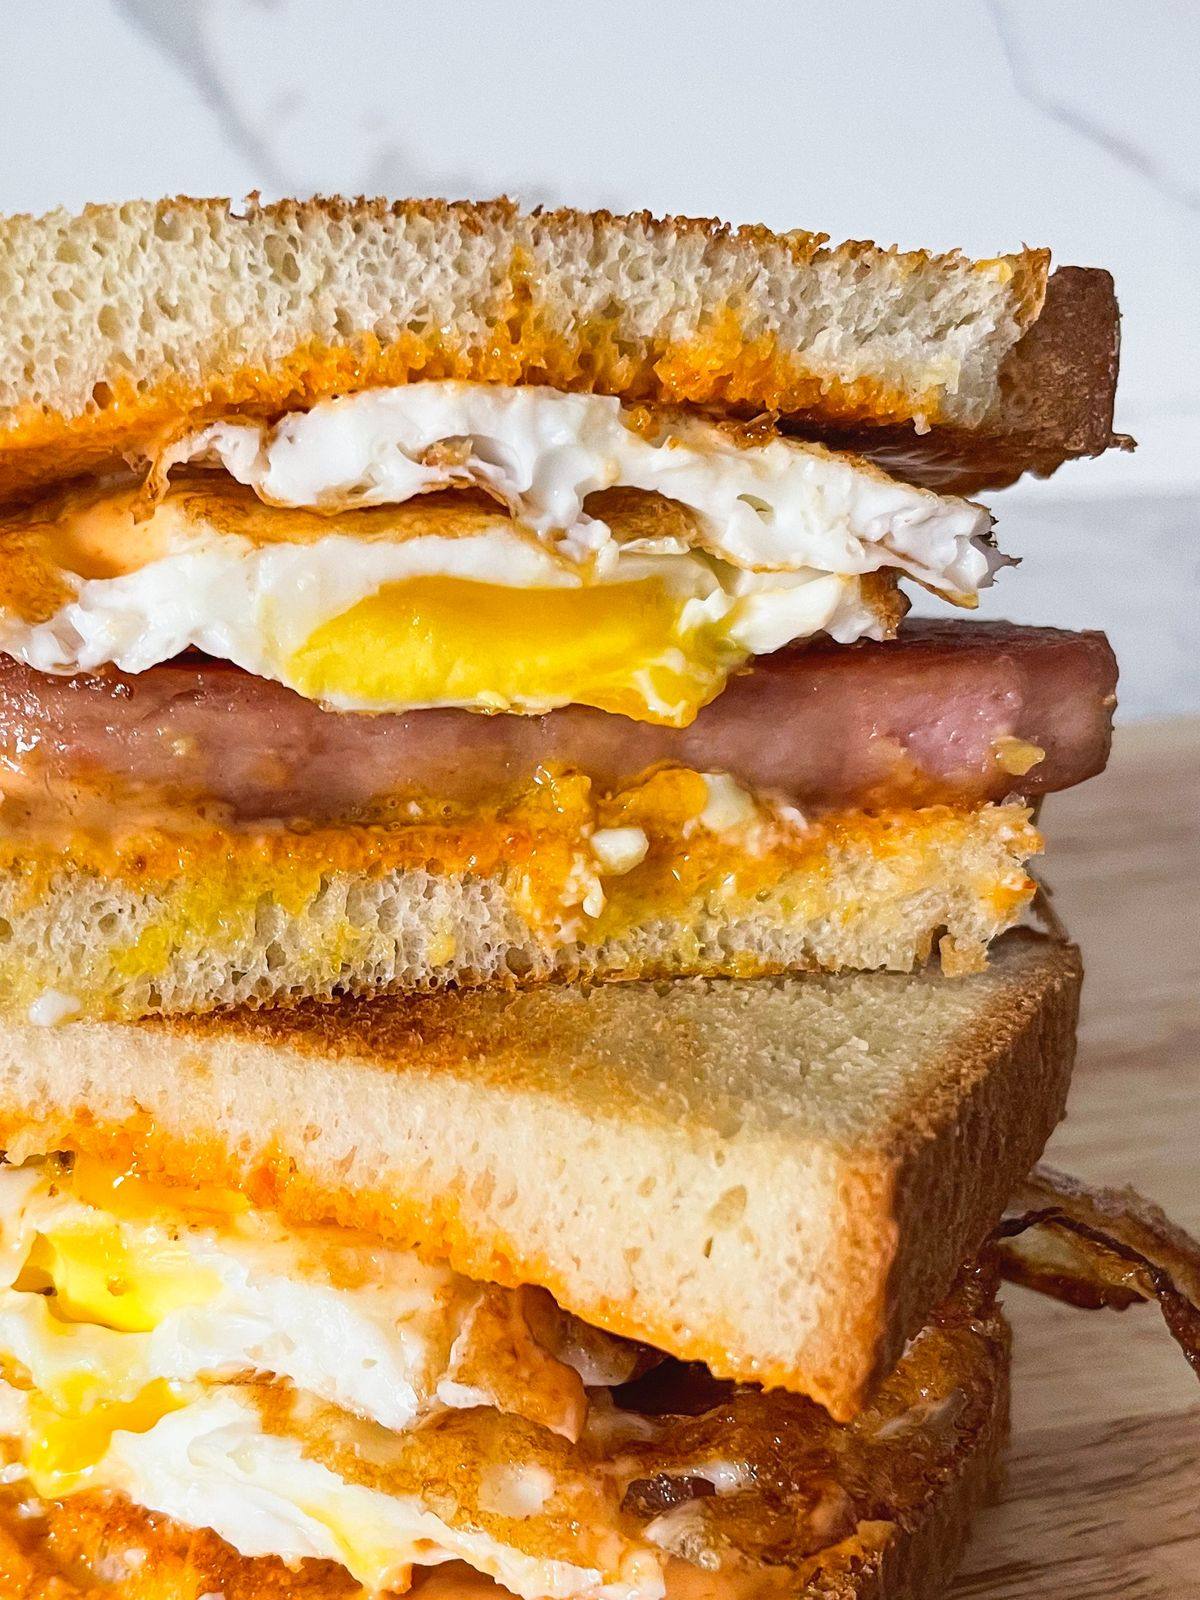 Spam and Eggs Sandwich with Spicy Mayo - Toast to Home